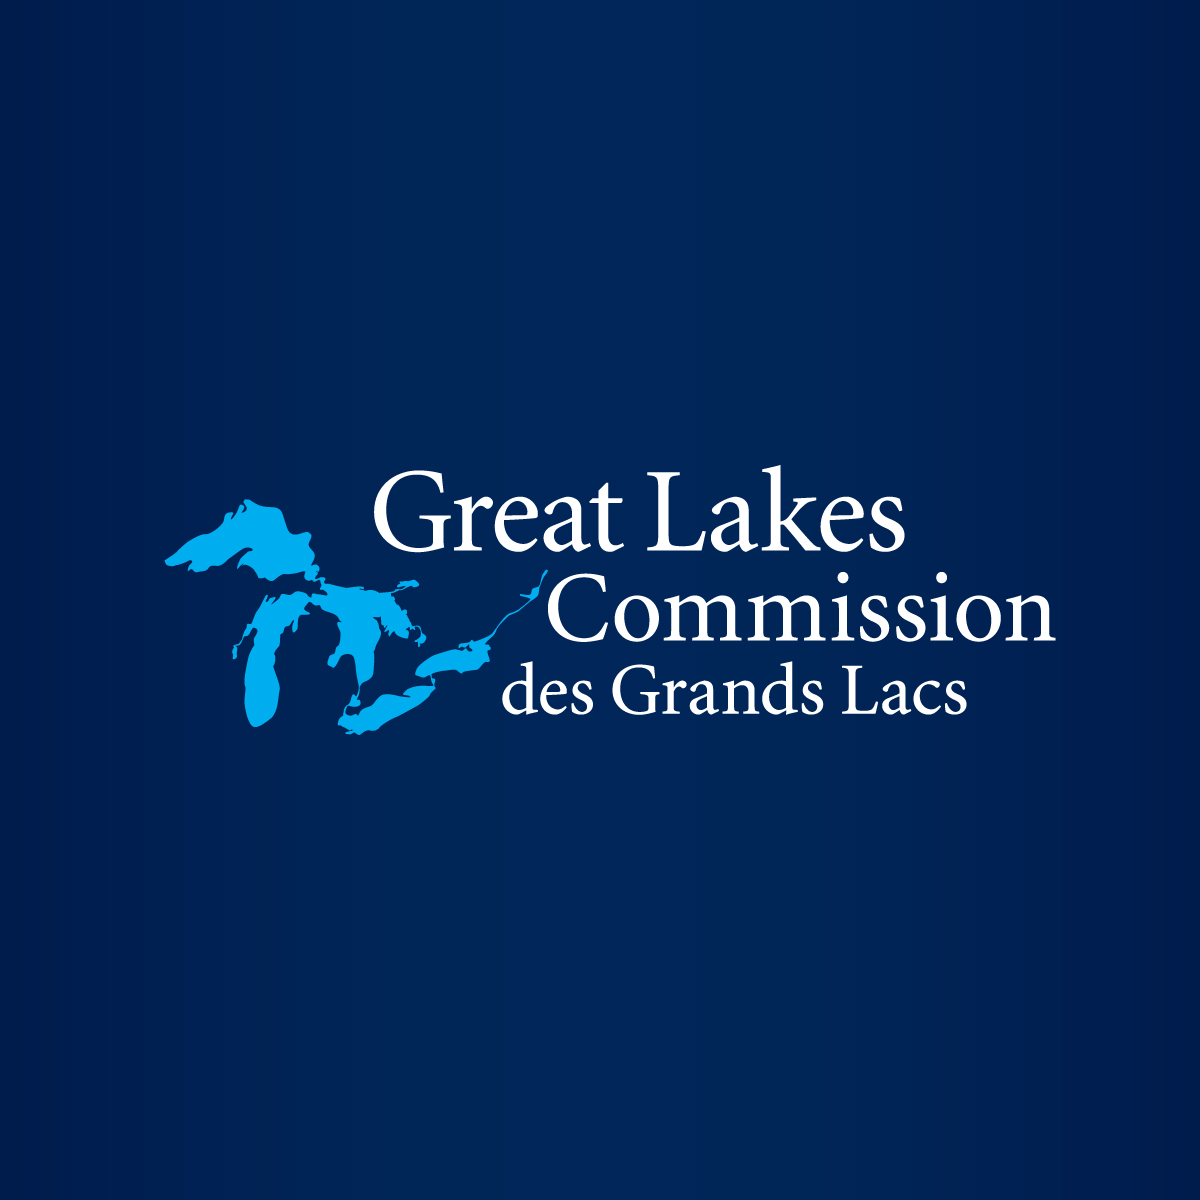 speakers to share great lakes stories at groups third virtual event